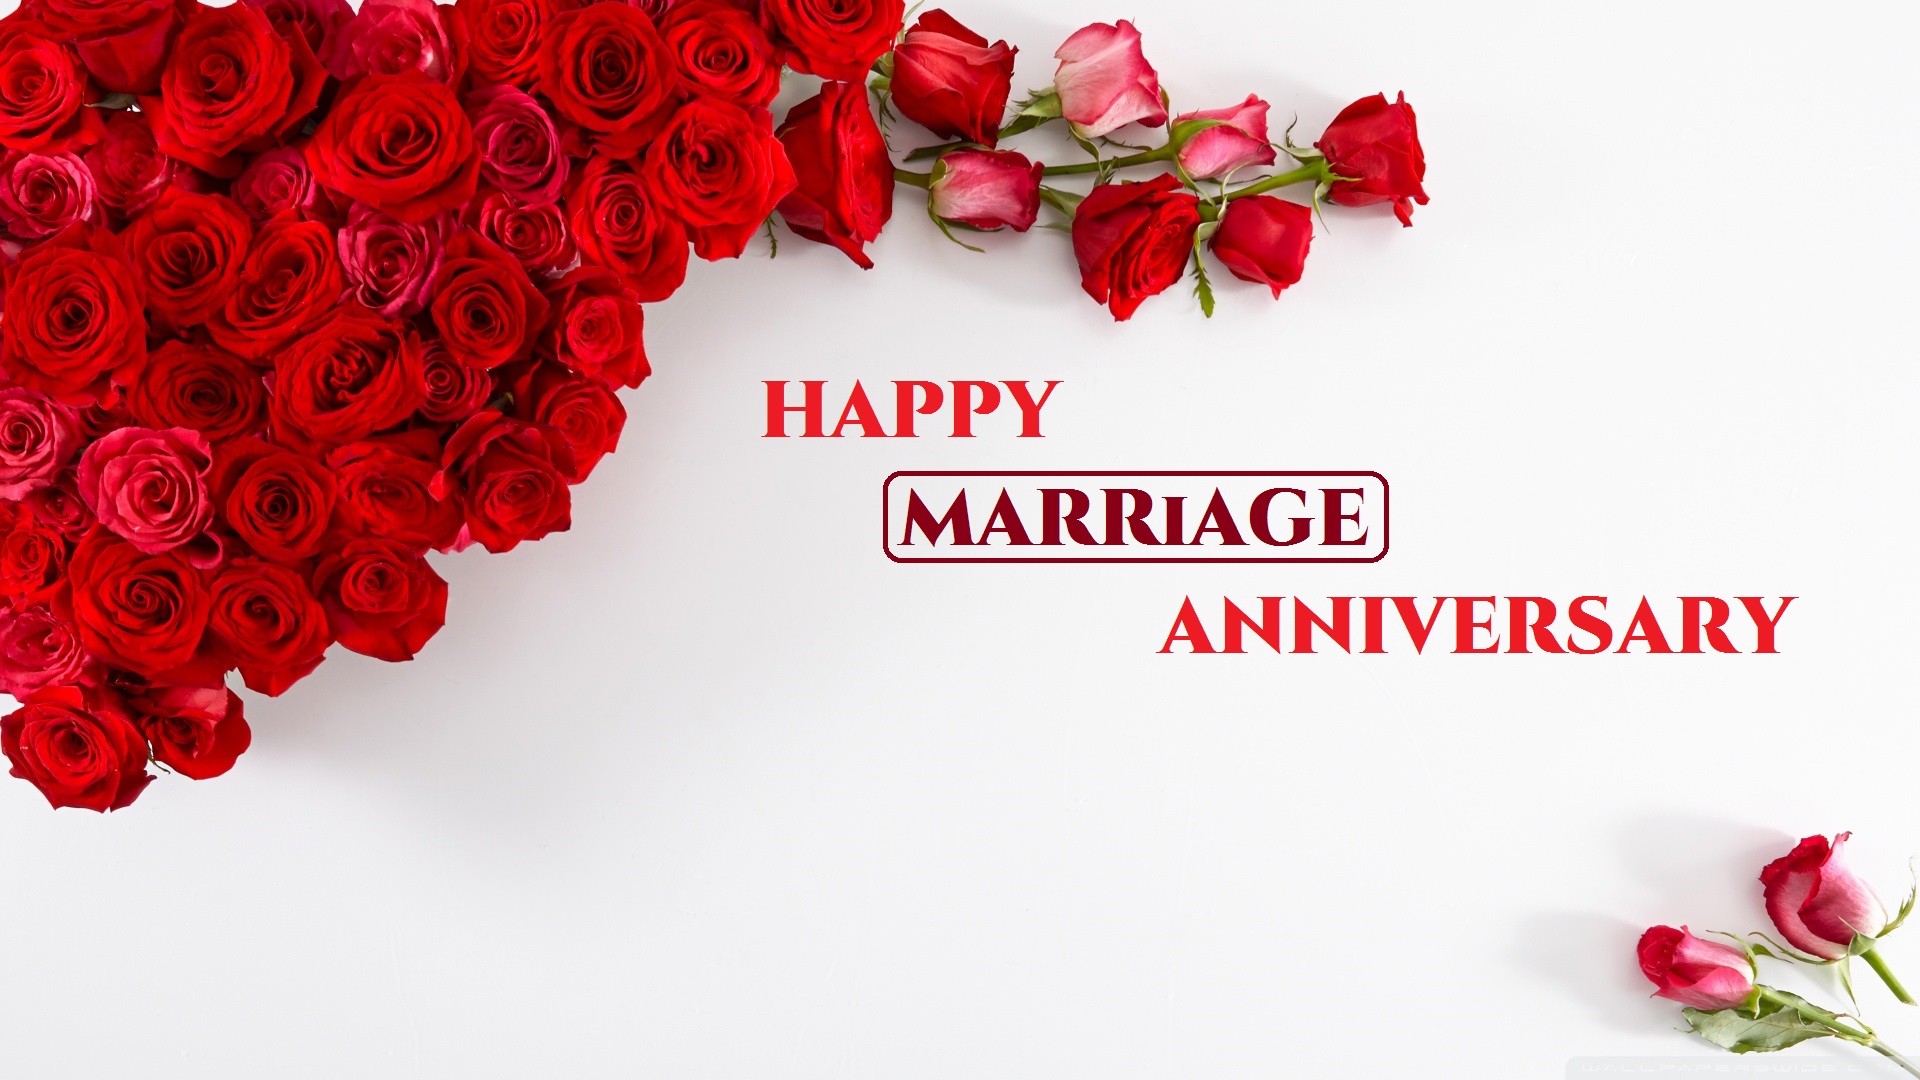 Happy Marriage Anniversary Hd Hd Wallpaper Backgrounds Download